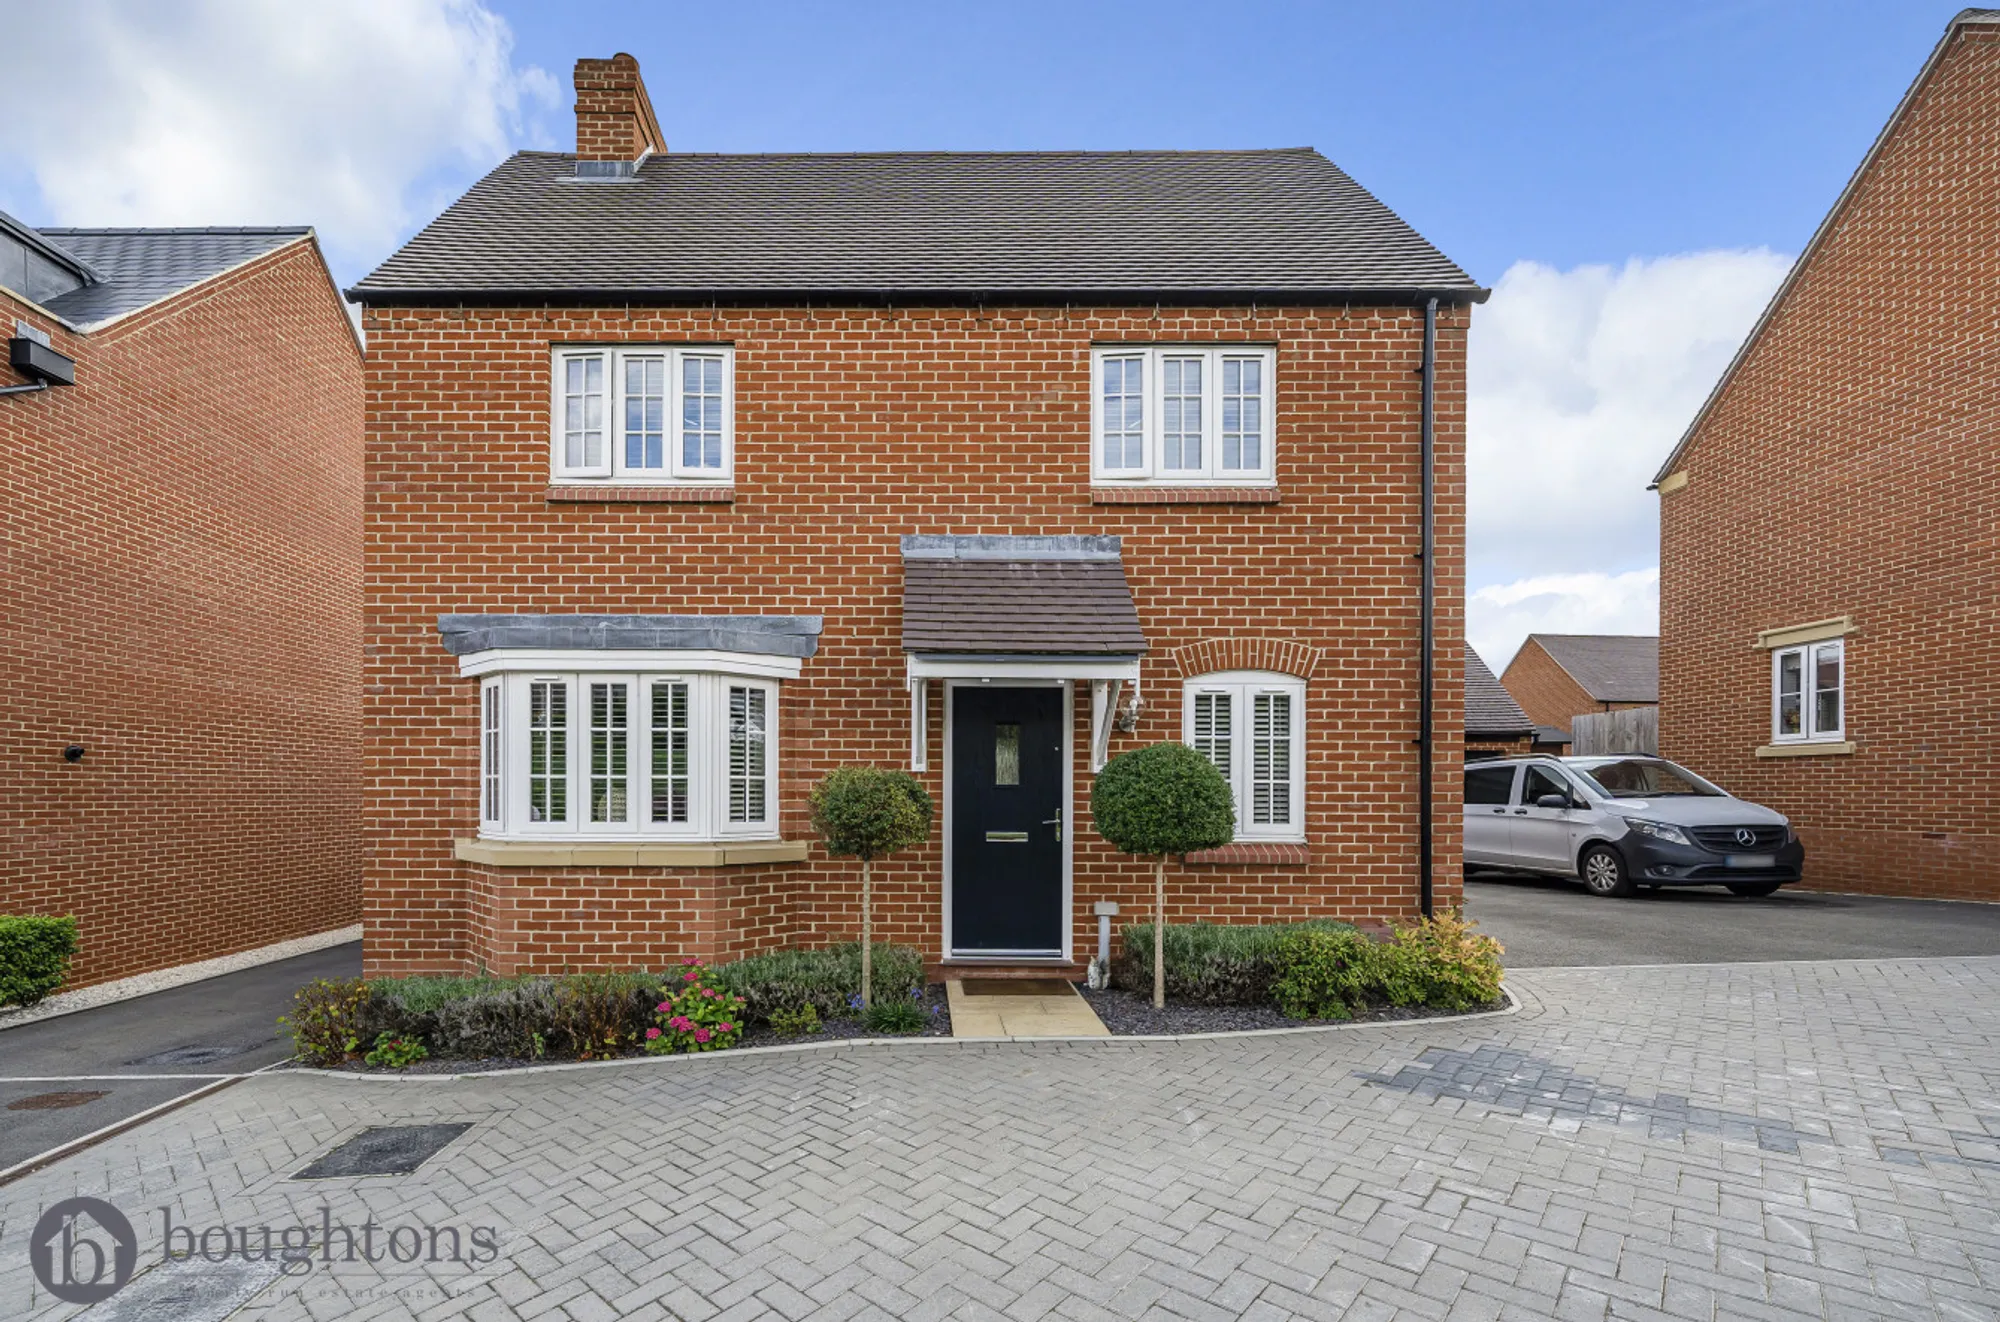 4 bed detached house for sale in Squirrel Close, Brackley  - Property Image 2